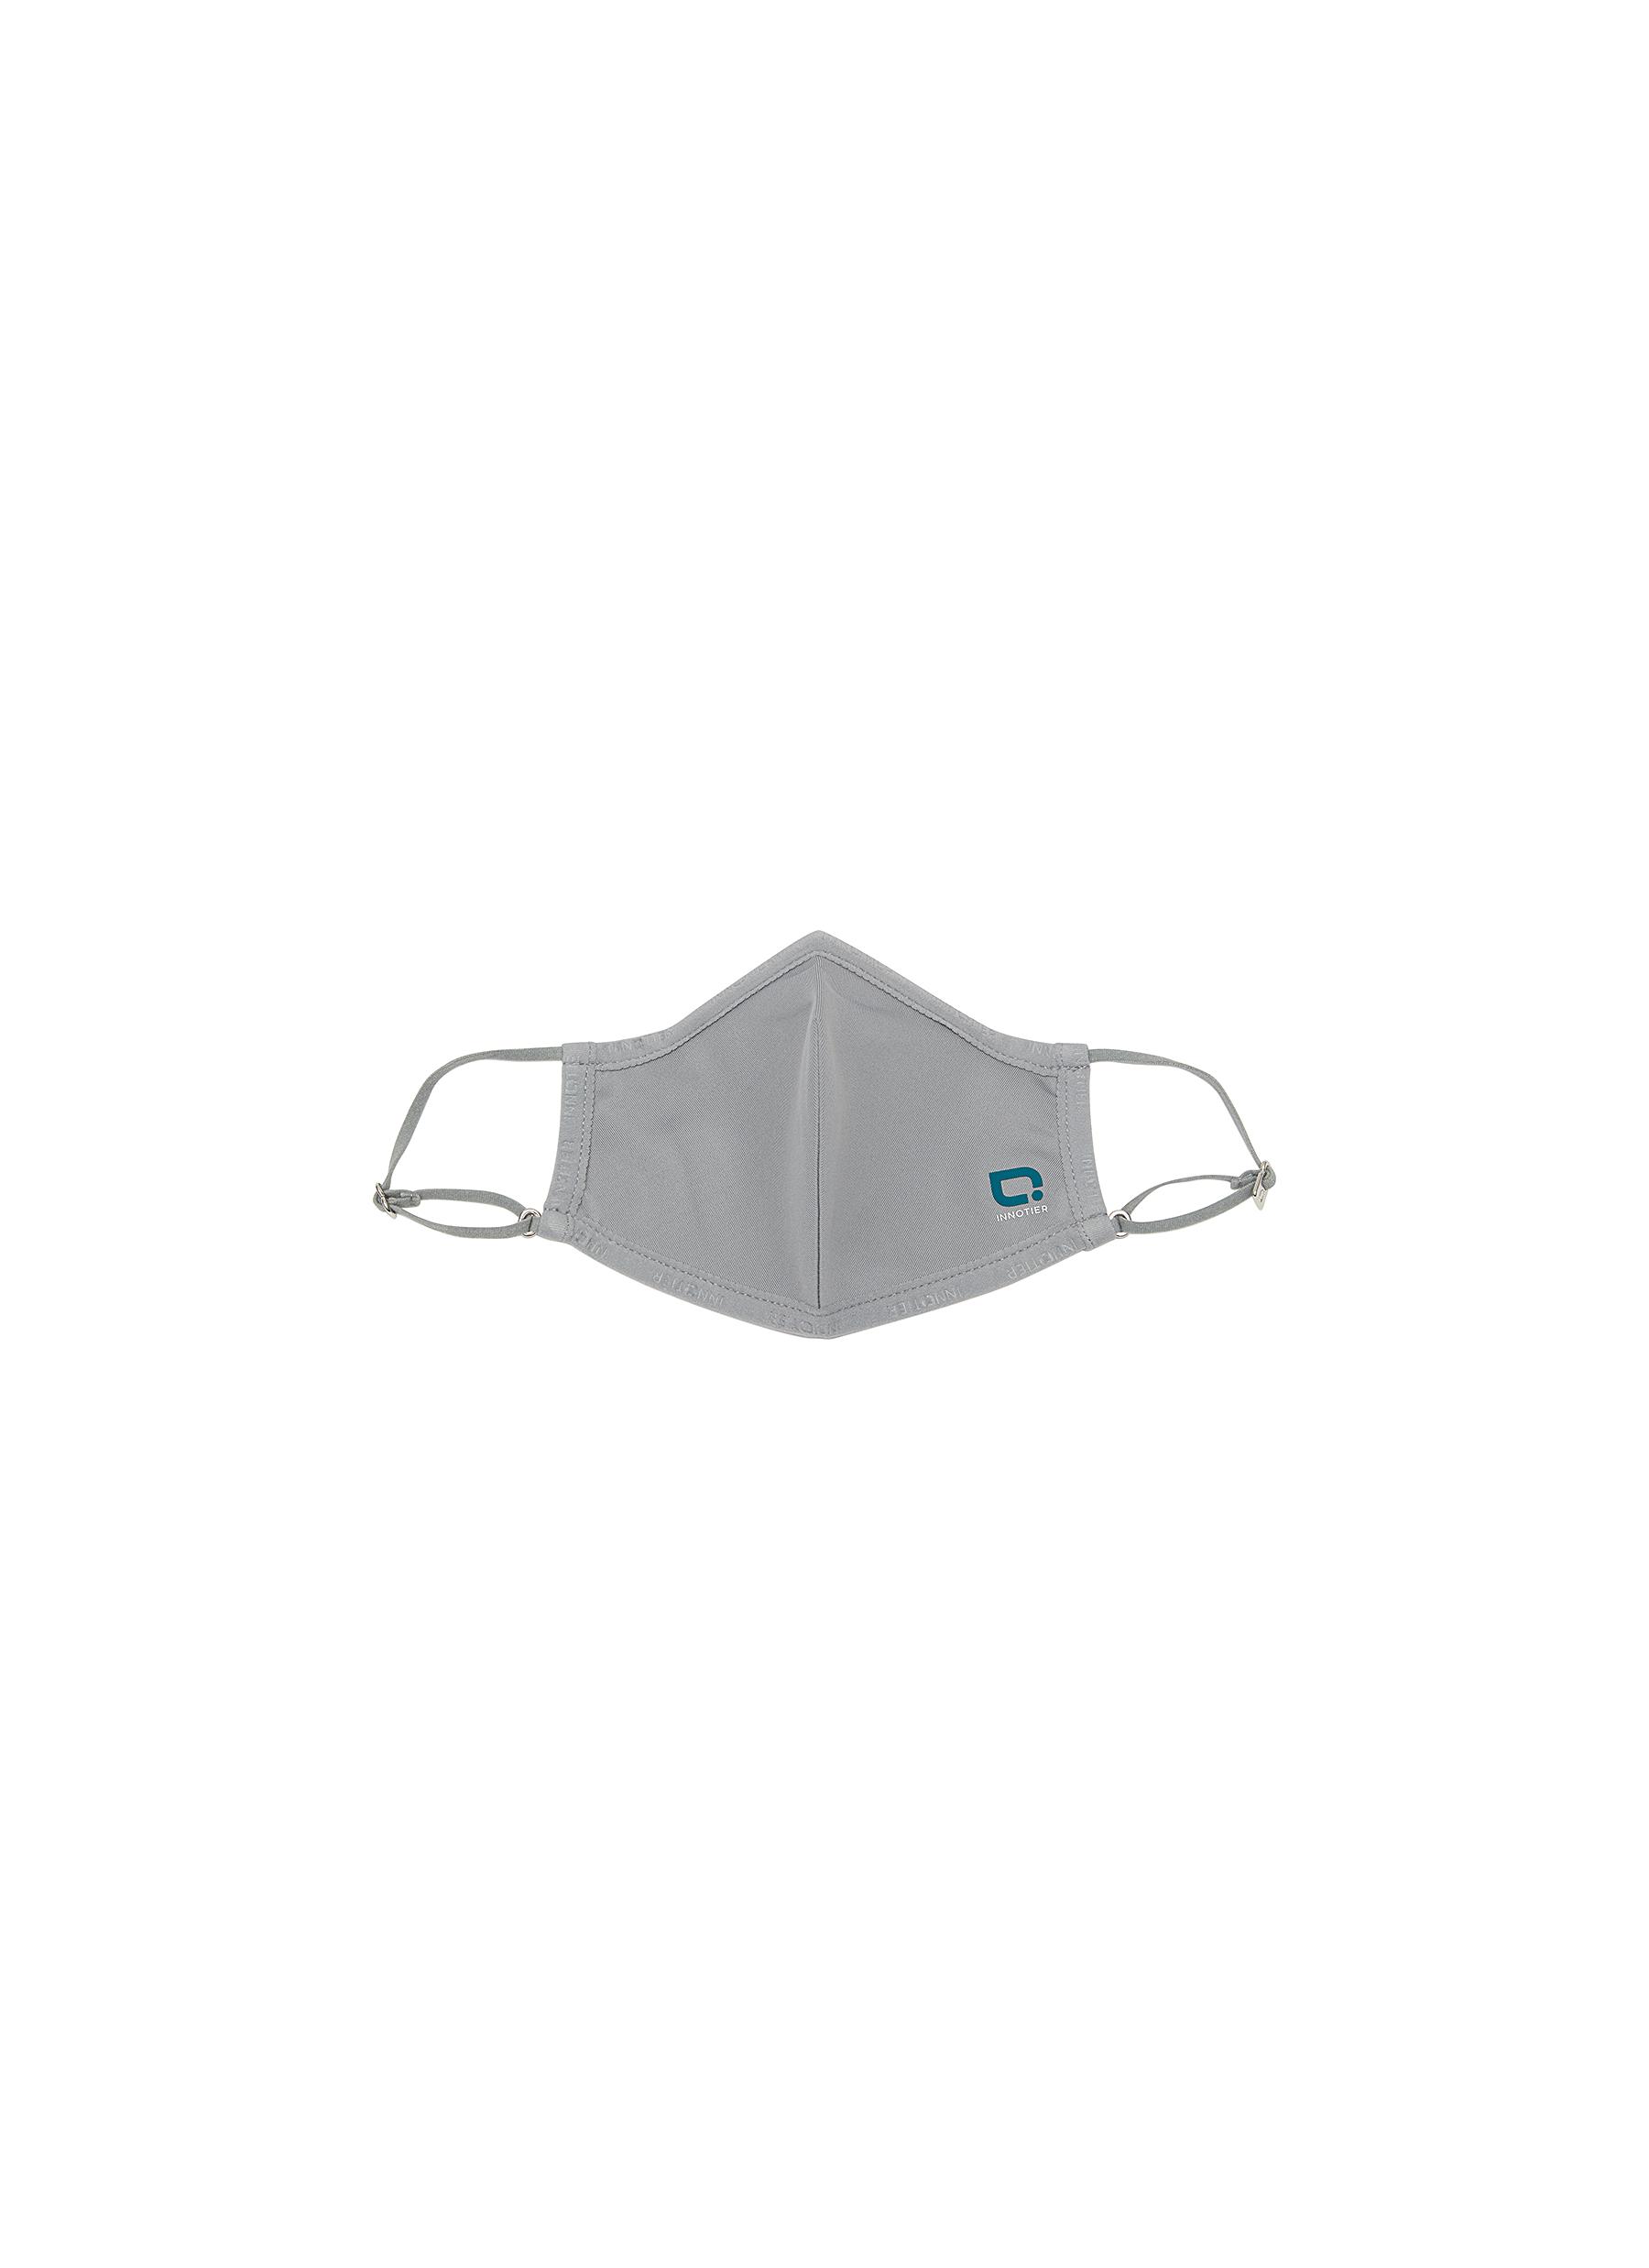 Innotier Innoshield Champion Series Sxm99 Adult Petite Reusable Face Mask - Peppery In Grey